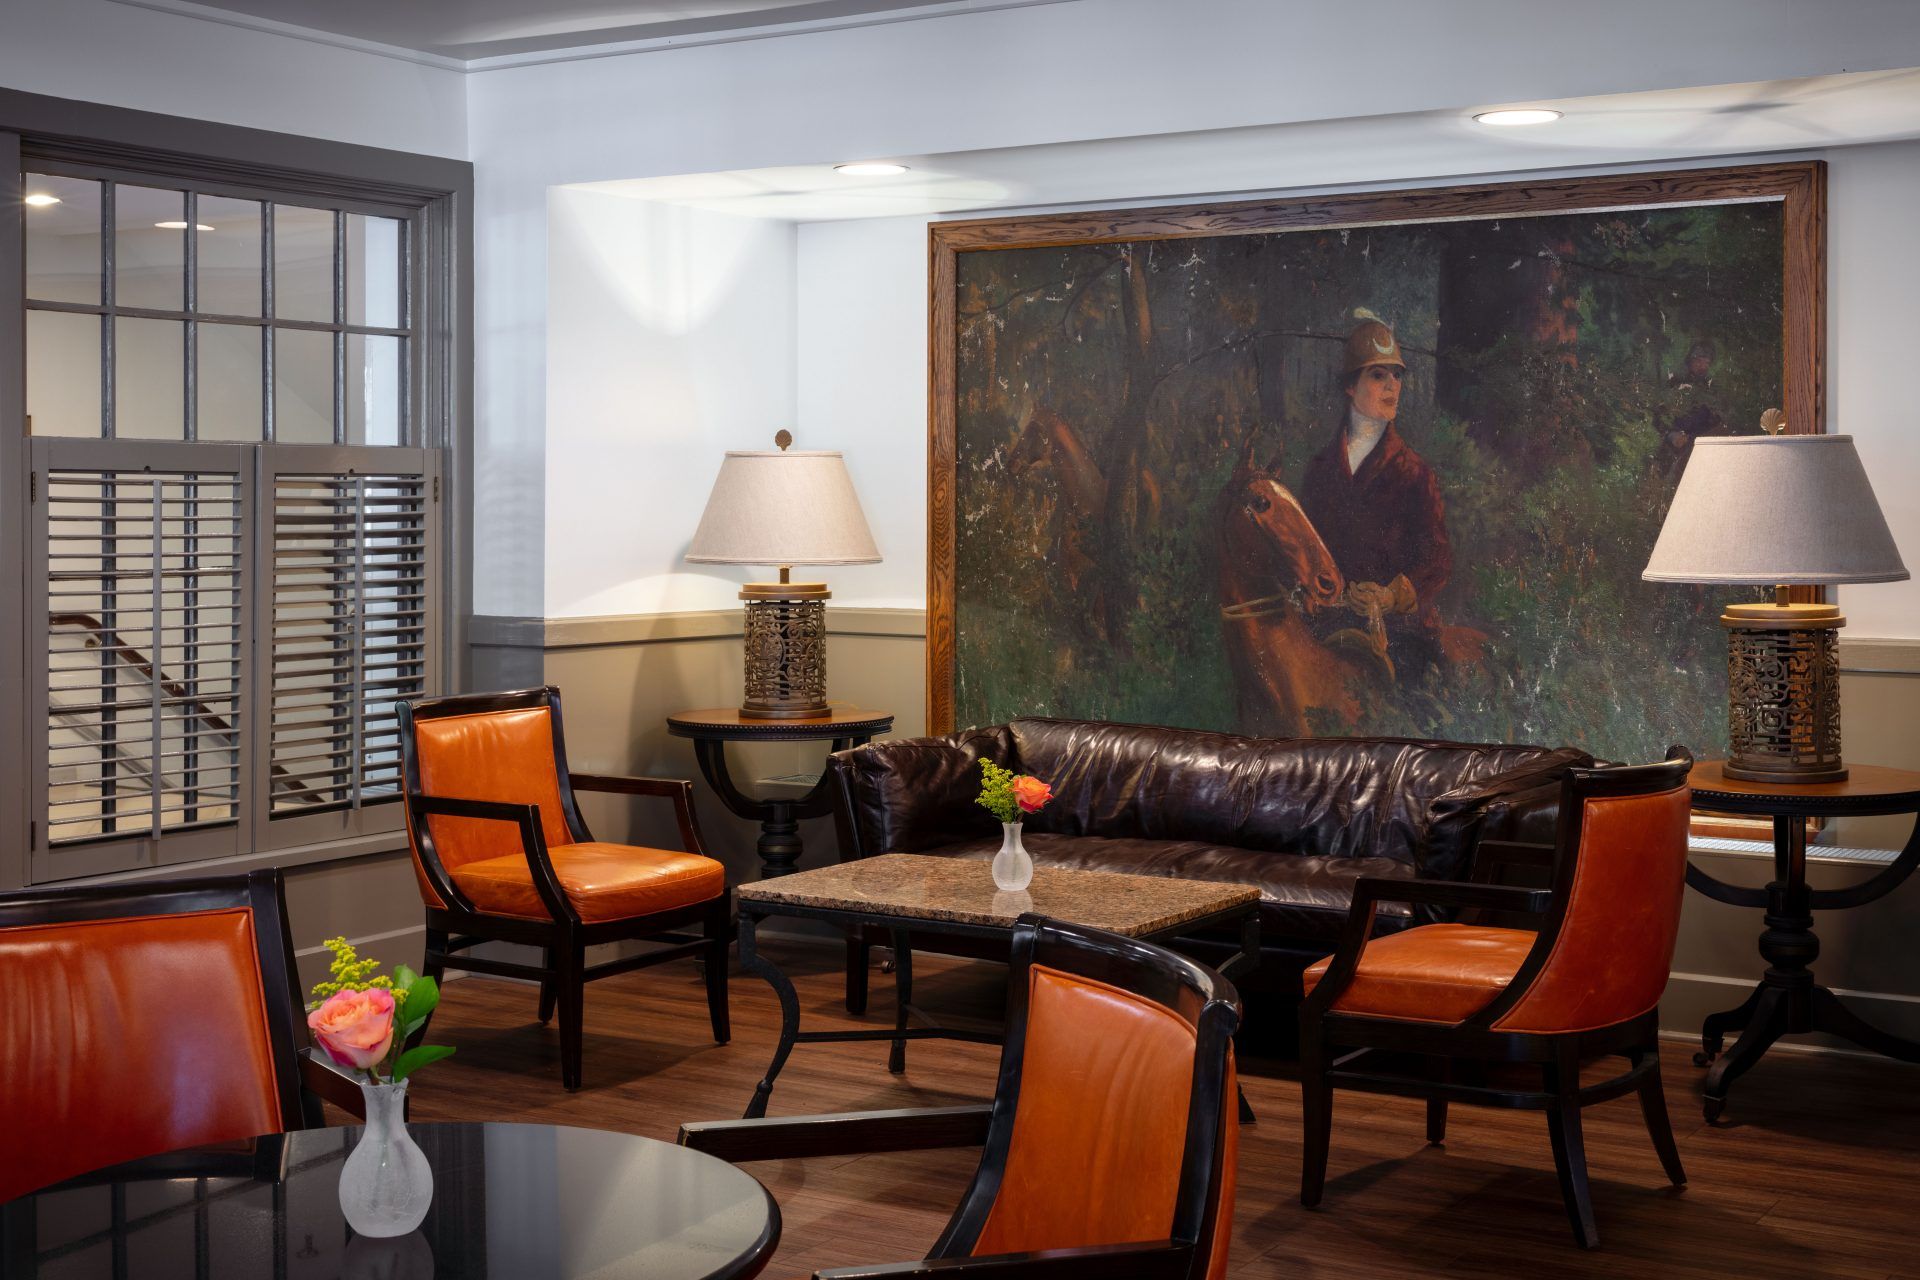 The lounge area of the restaurant shows orange chairs and a brown leather couch up against a wall with a large painting of a man on a horse.